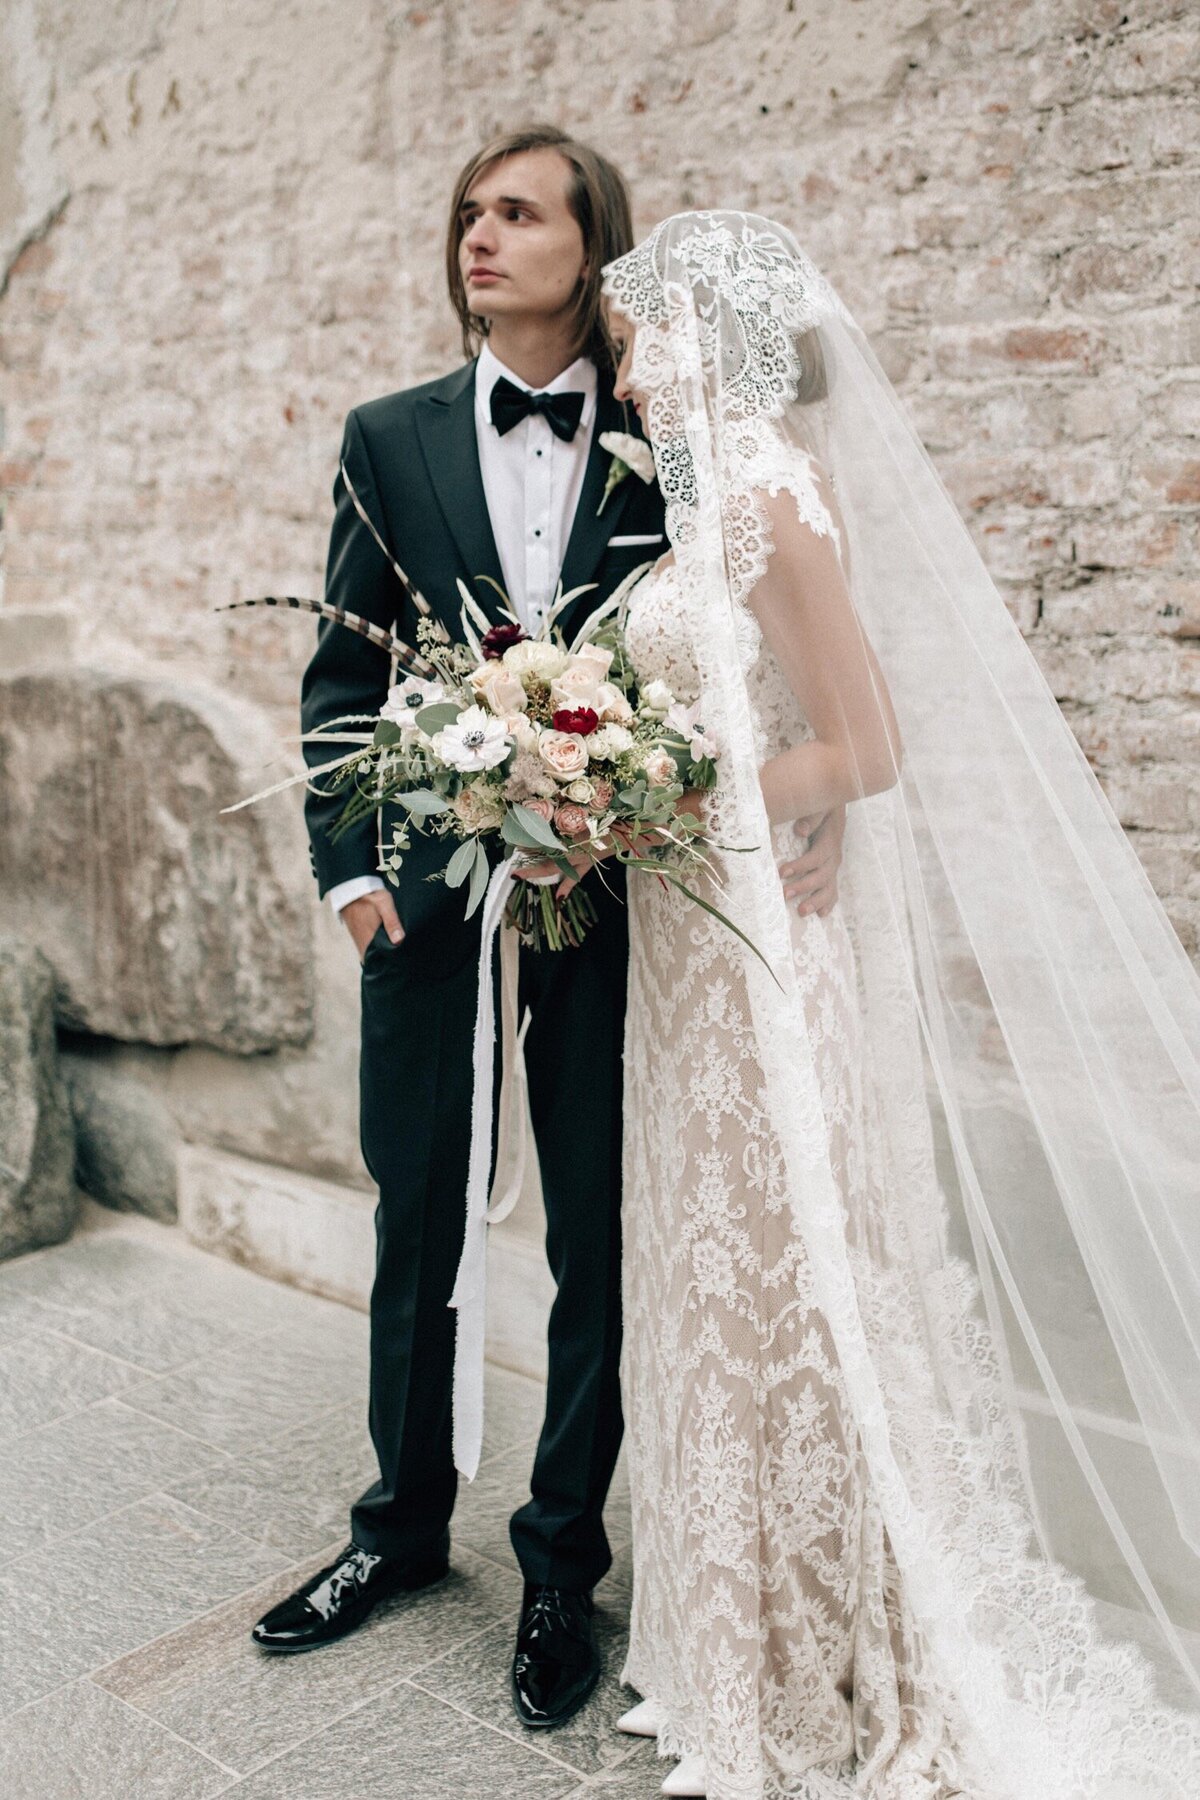 061_Flora_And_Grace_Europe_Fine_Art_Wedding_Photographer-146_A sophisticated fine art wedding in Europe with an editorial edge captured by Vogue wedding photographer Flora and Grace.